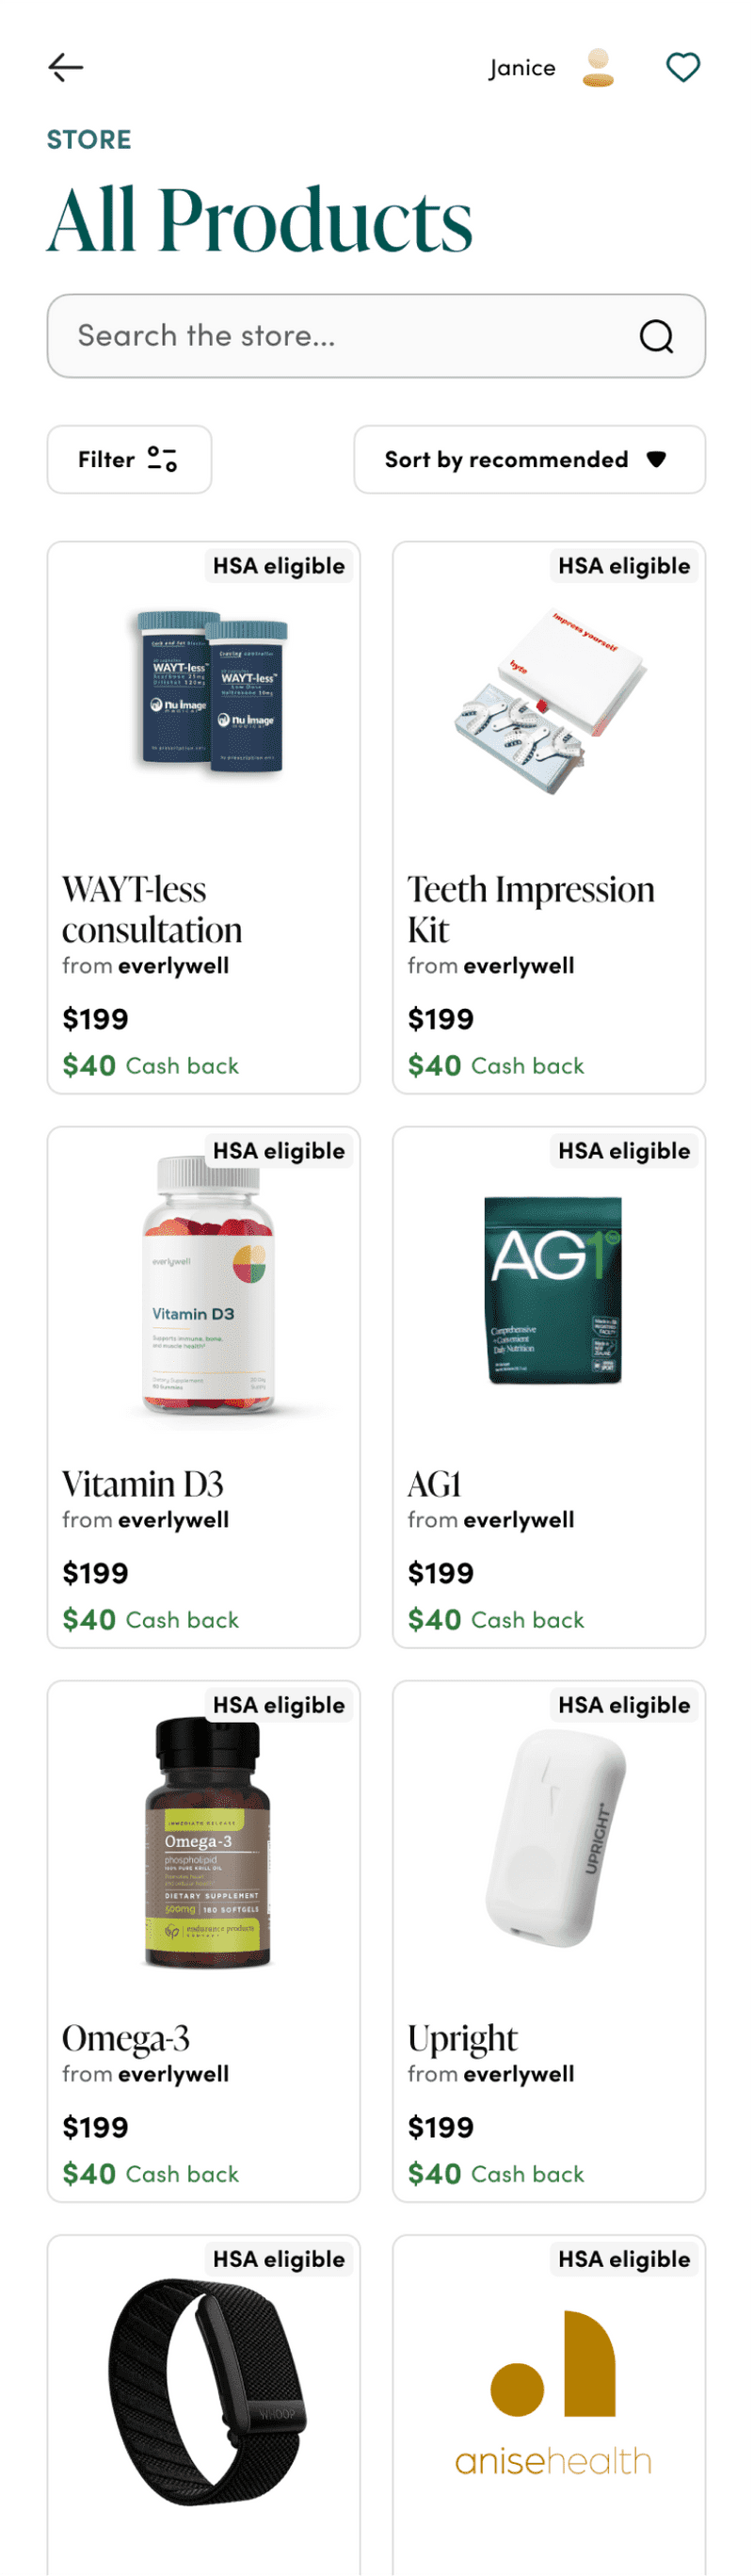 Frontrow Health website screenshot on a mobile device. Showing a list of medical products available for purchase.